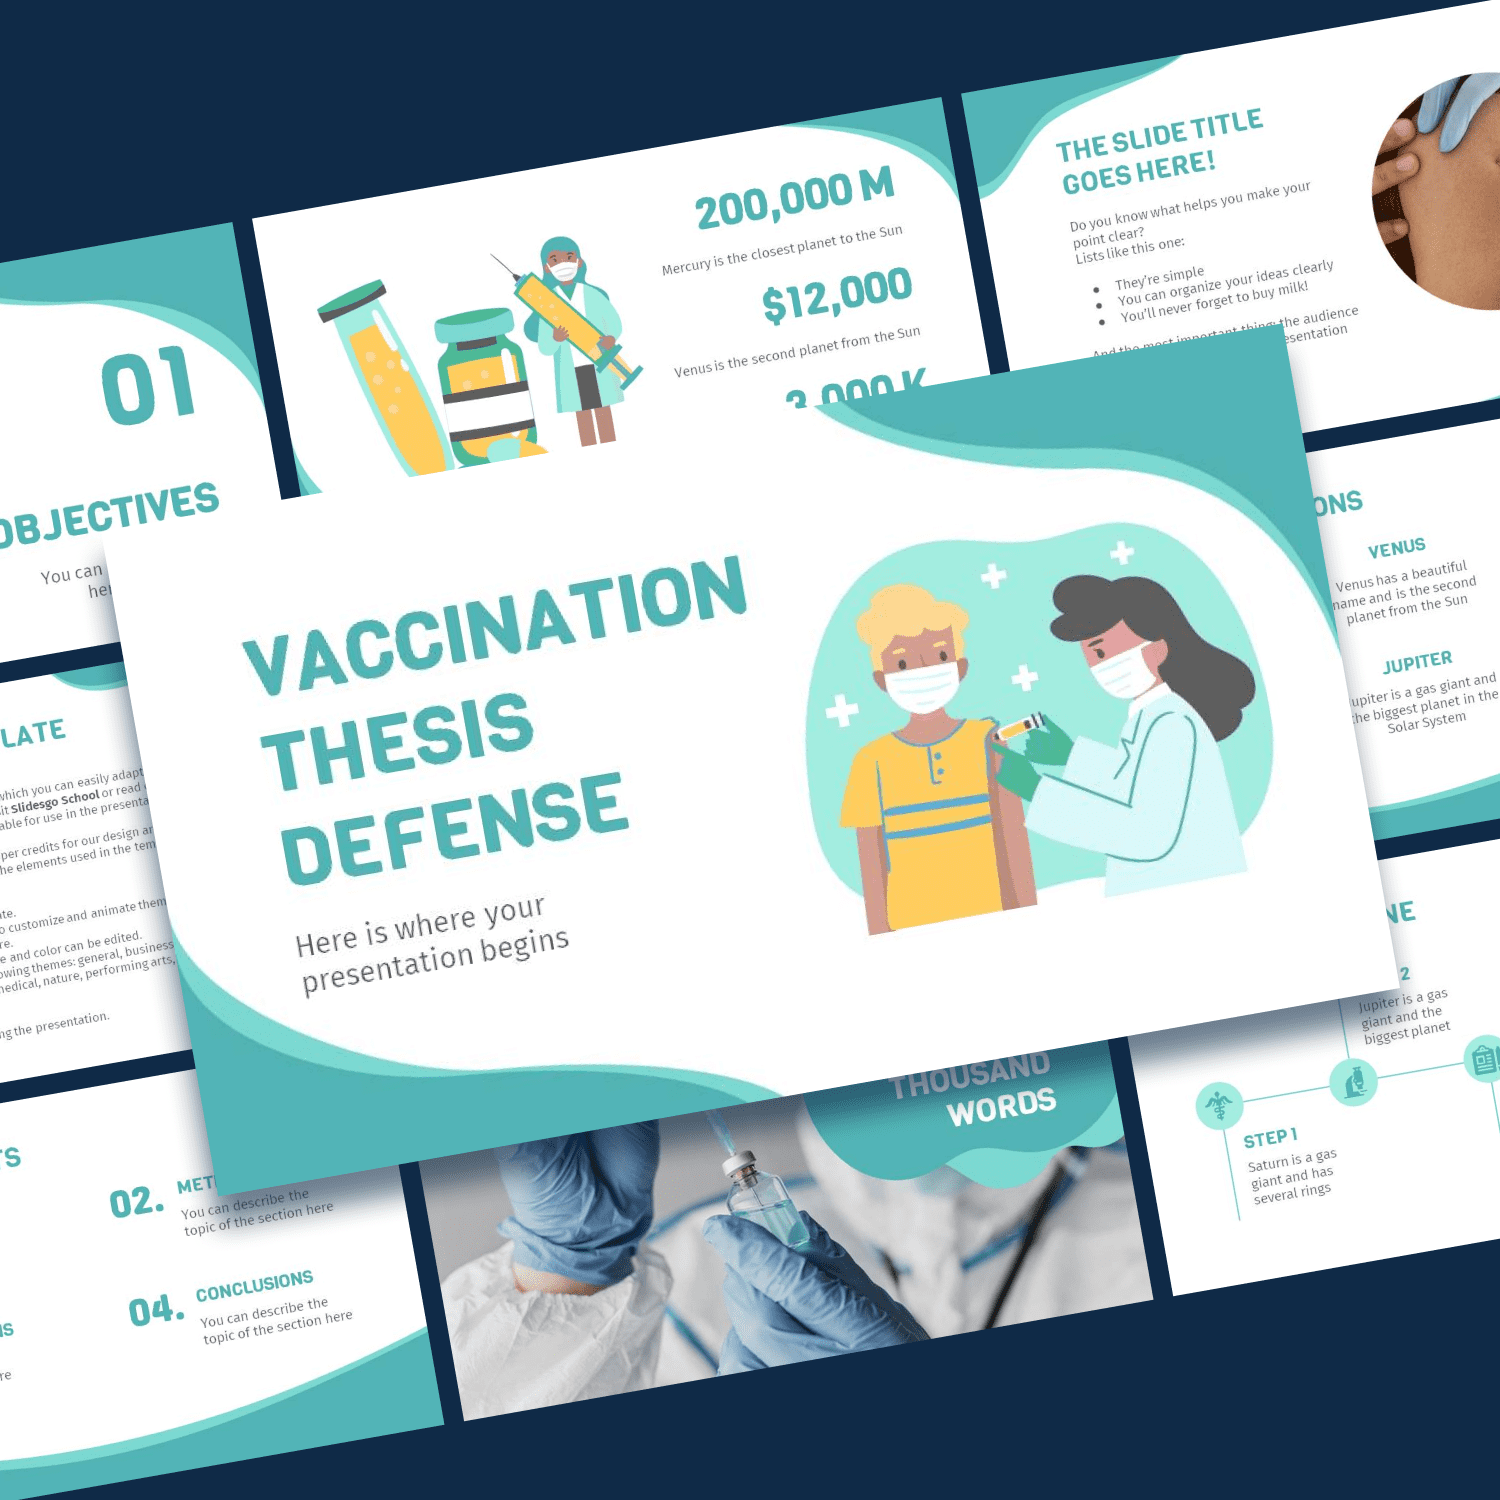 Free Vaccination Thesis Defense Powerpoint Template.